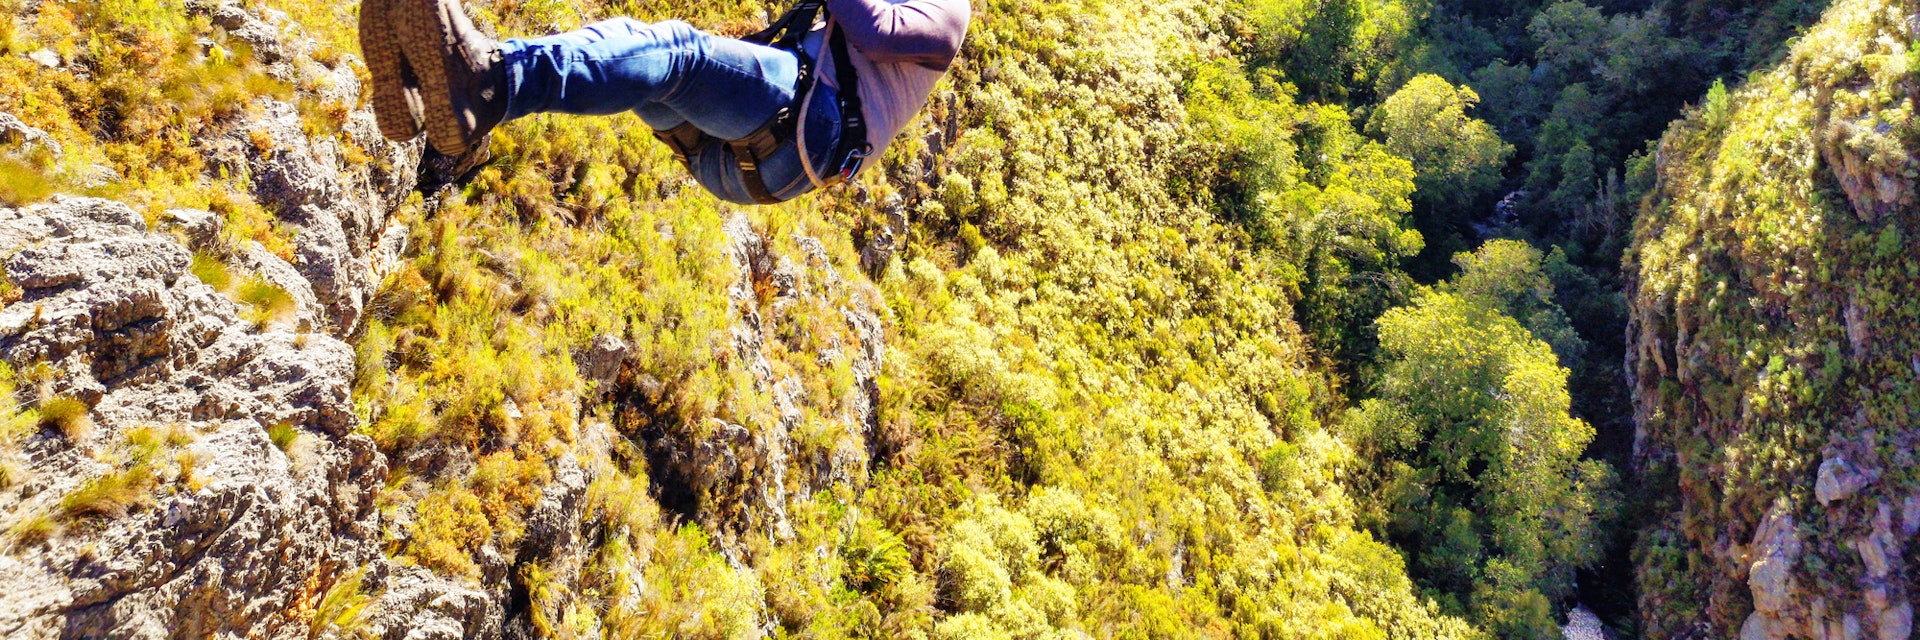 A zip line in Hottentots Holland Nature Reserve in South Africa.